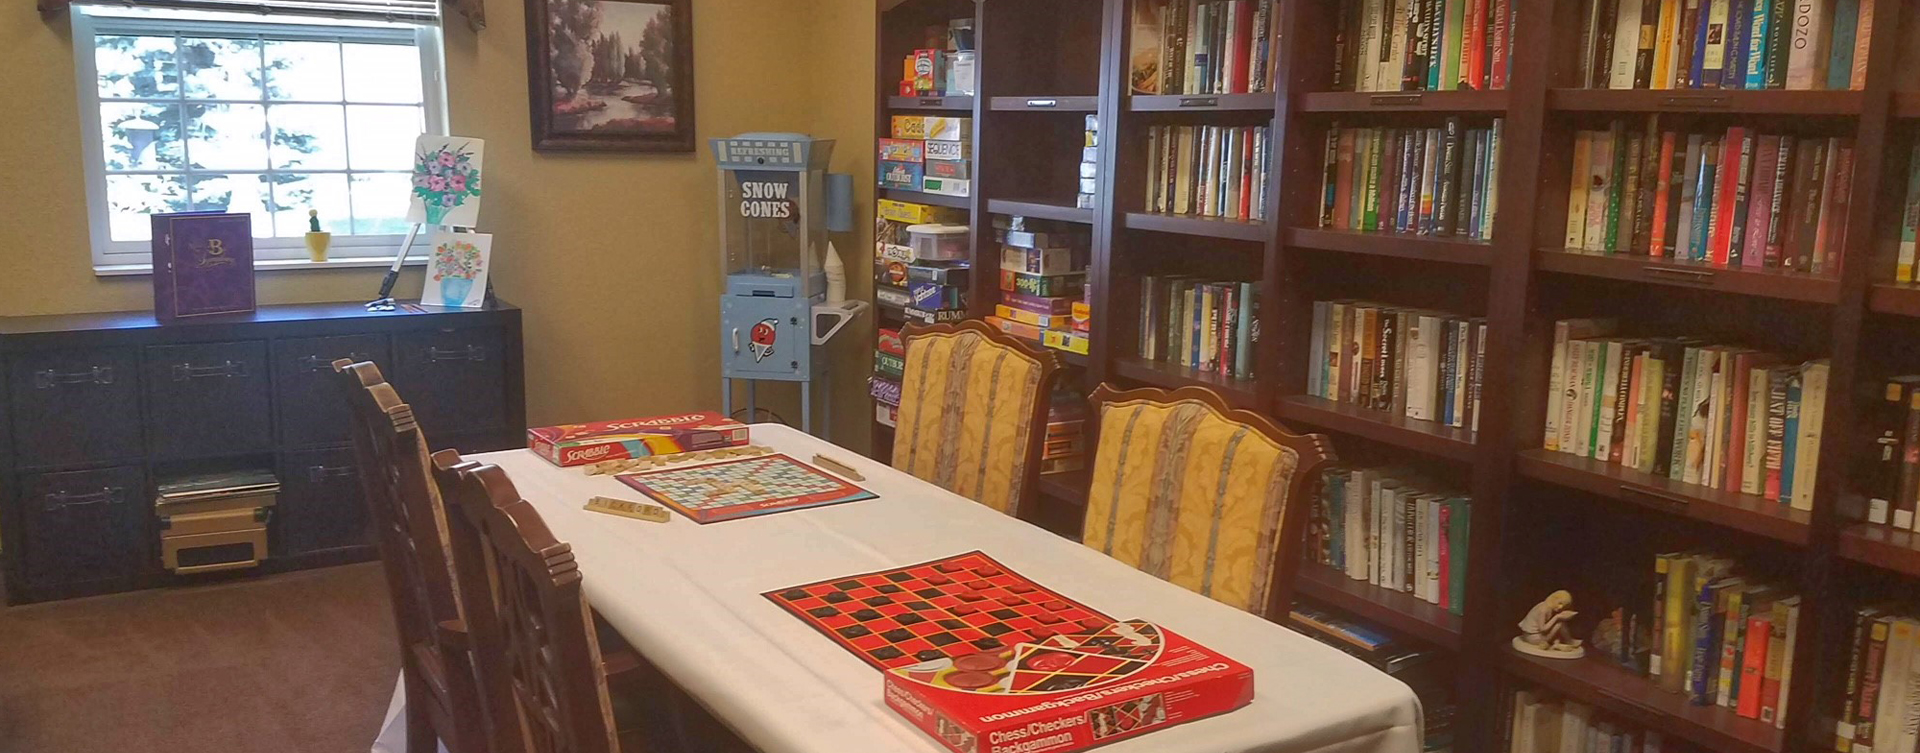 Enjoy a good card game with friends in the activity room at Bickford of Okemos